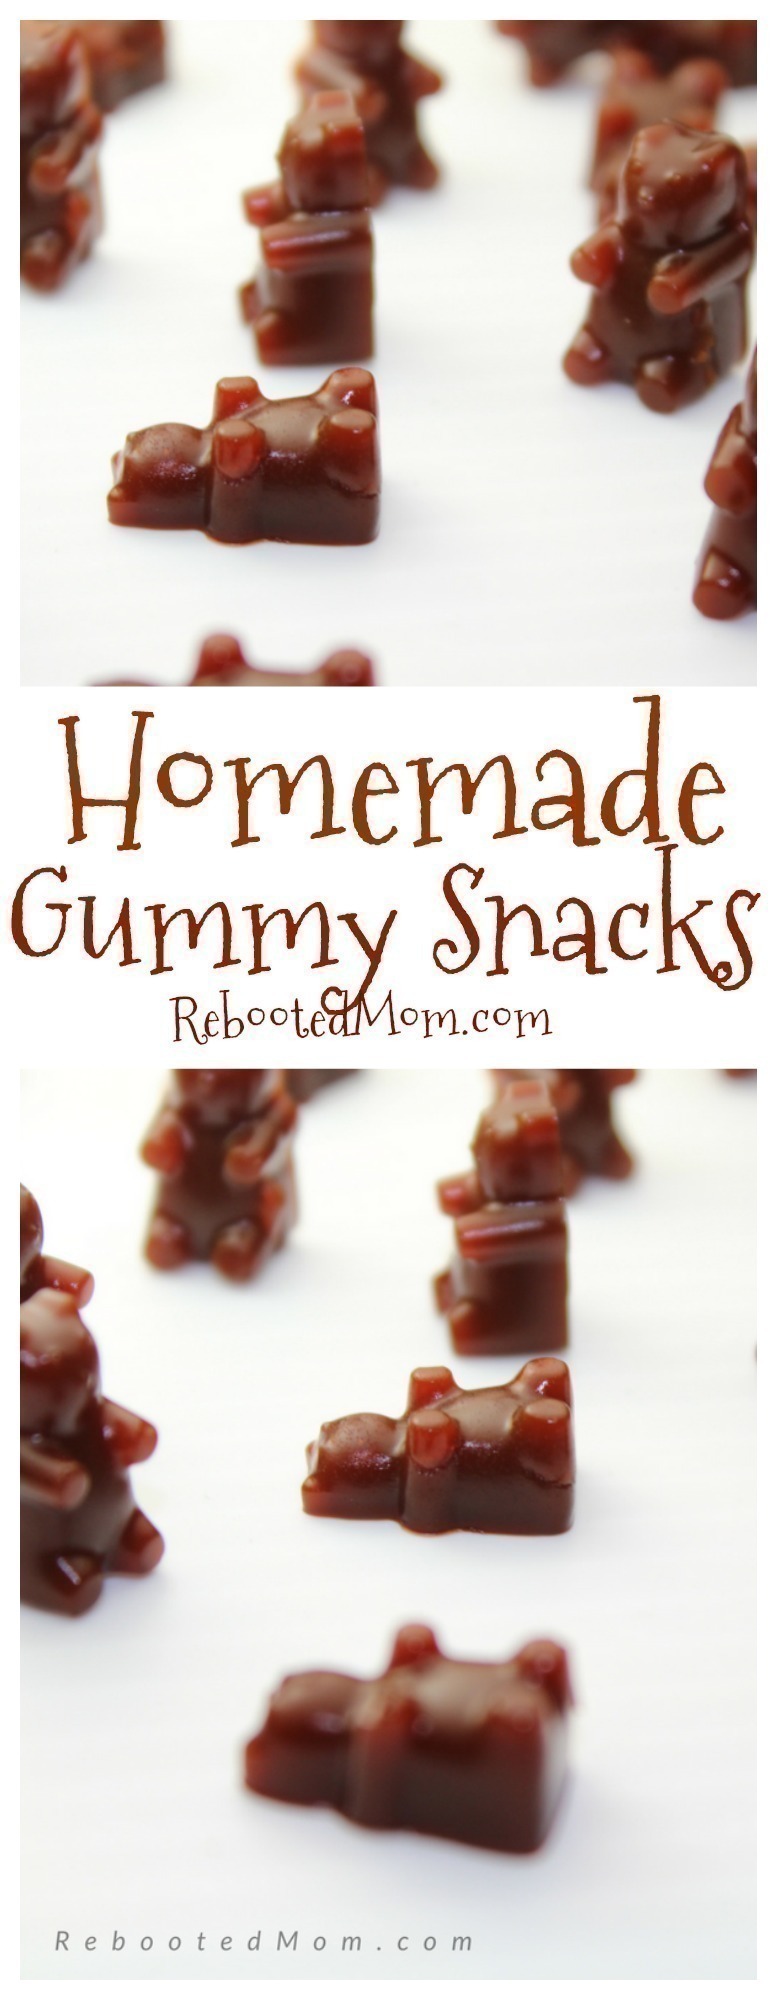 These homemade fruit snacks are SO easy to make - and incredibly healthy!